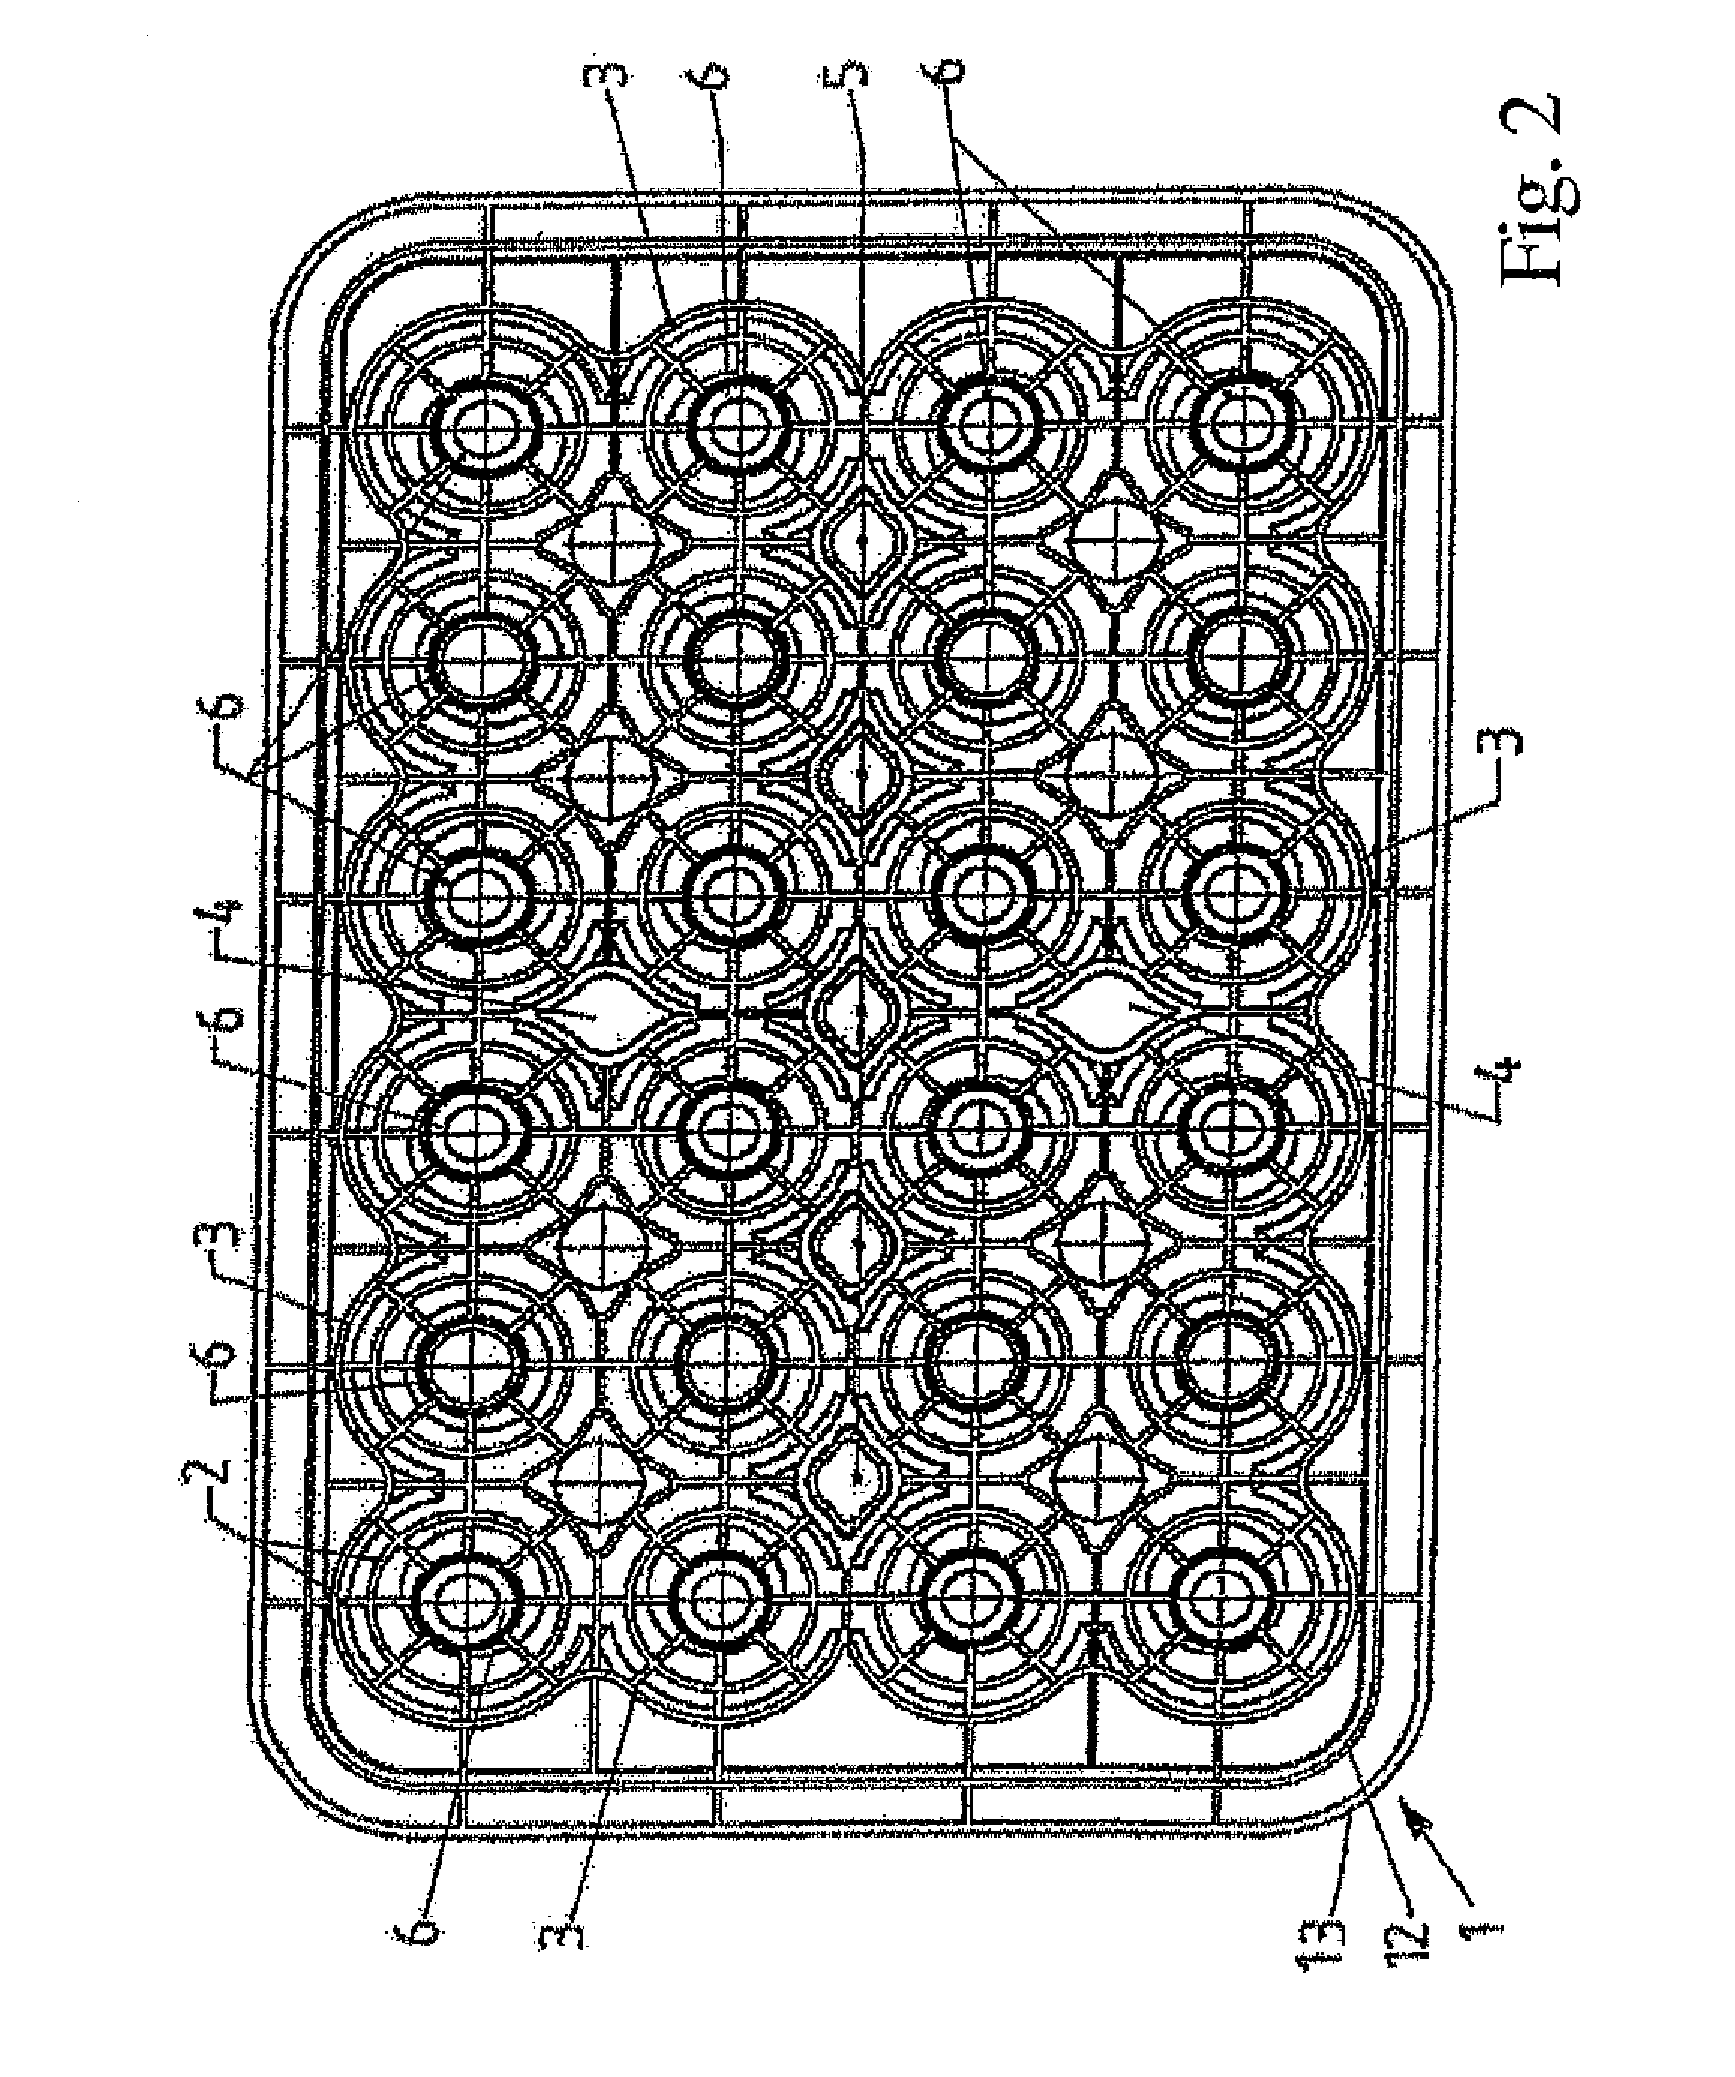 Arrangement for Transporting Bottles, Drinks Containers and/or Multipacks